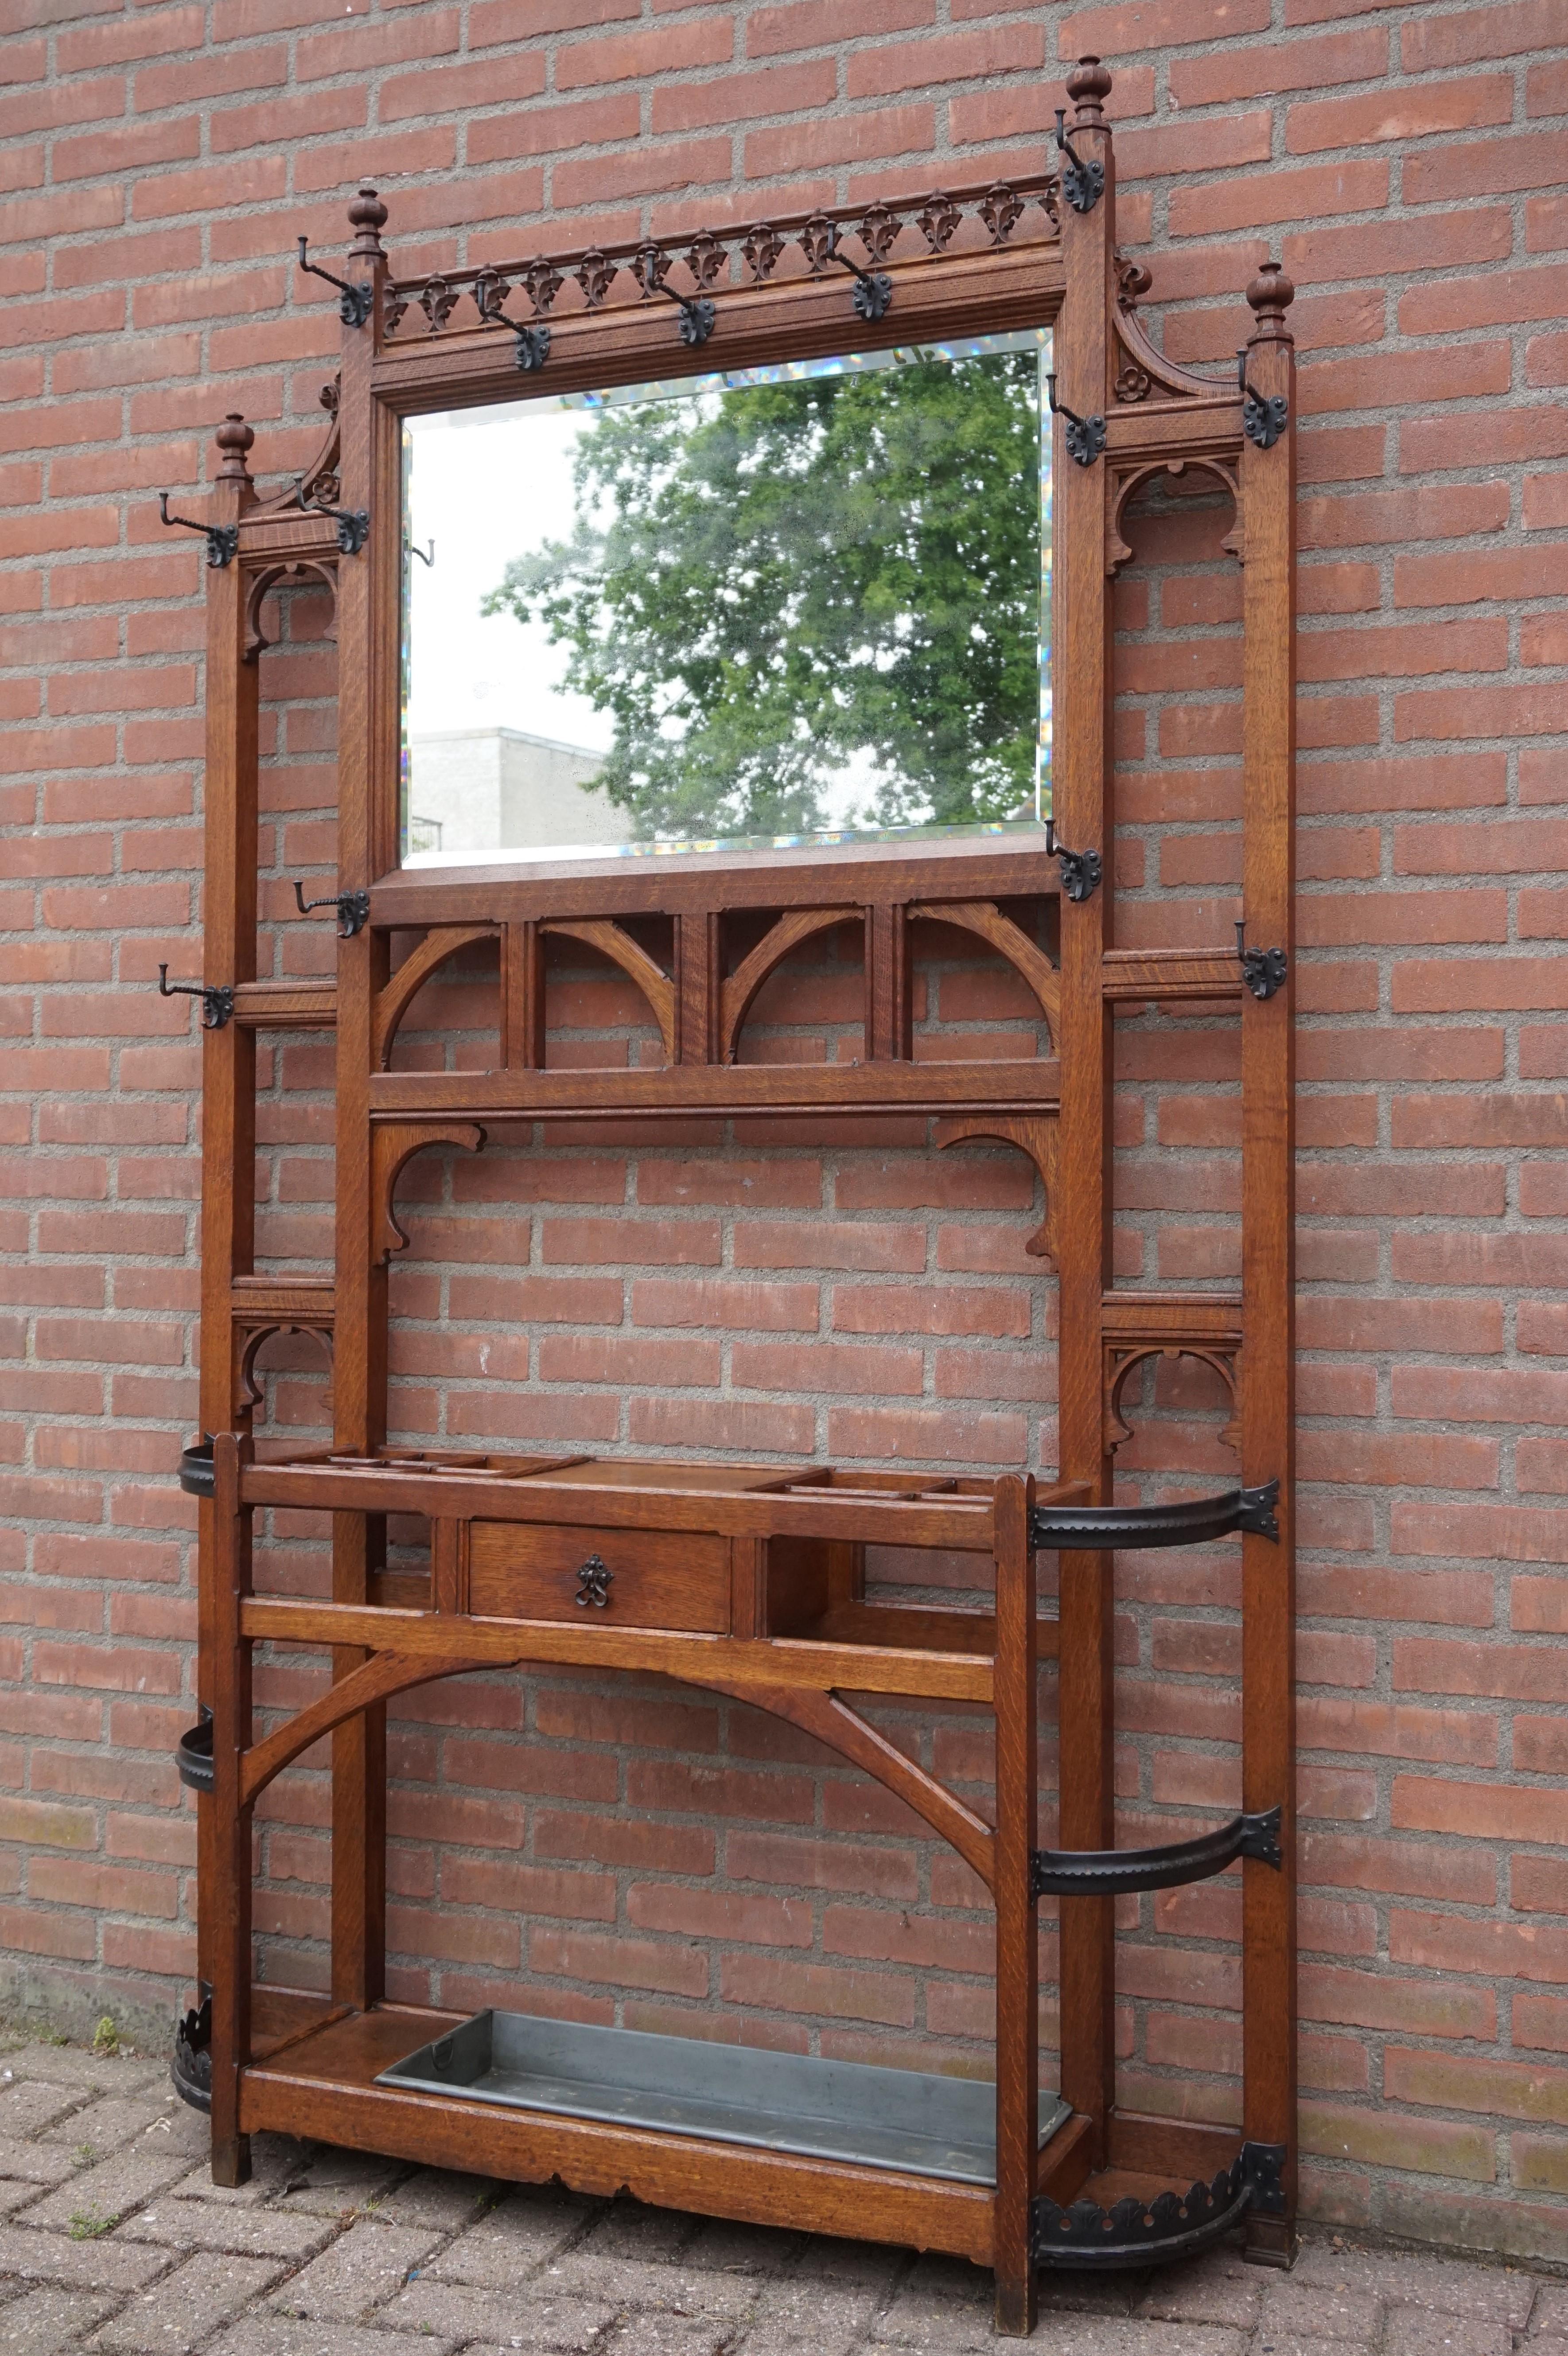 Unique and highly practical Gothic coat rack with cane and umbrella stand and mirror.

This large and beautiful Gothic hall Stand is another great example of the quality of the workmanship in late 19th and early 20th century Europe. Hall stands of